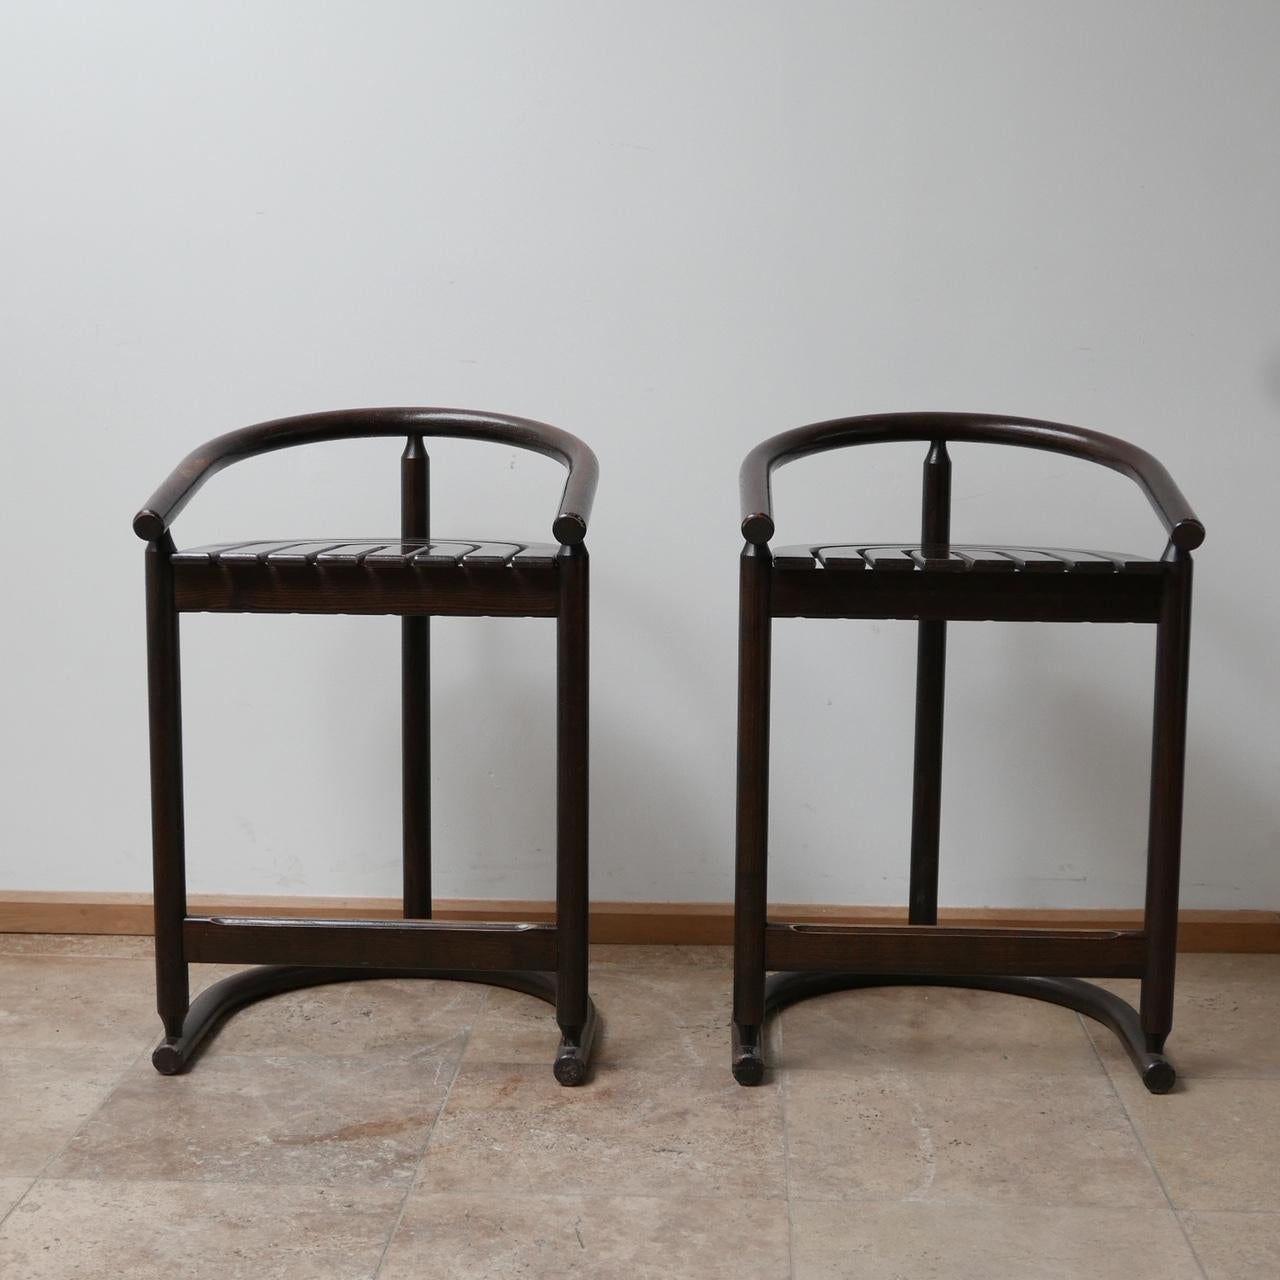 A good looking pair of bentwood bar stools,

German, c1980s. 

Radial form seats formed from four slats. 

Good condition, some small scuffs and nicks commensurate with age. 

Dimensions: 54 W x 48 D x 65 seat height x 80 total height in